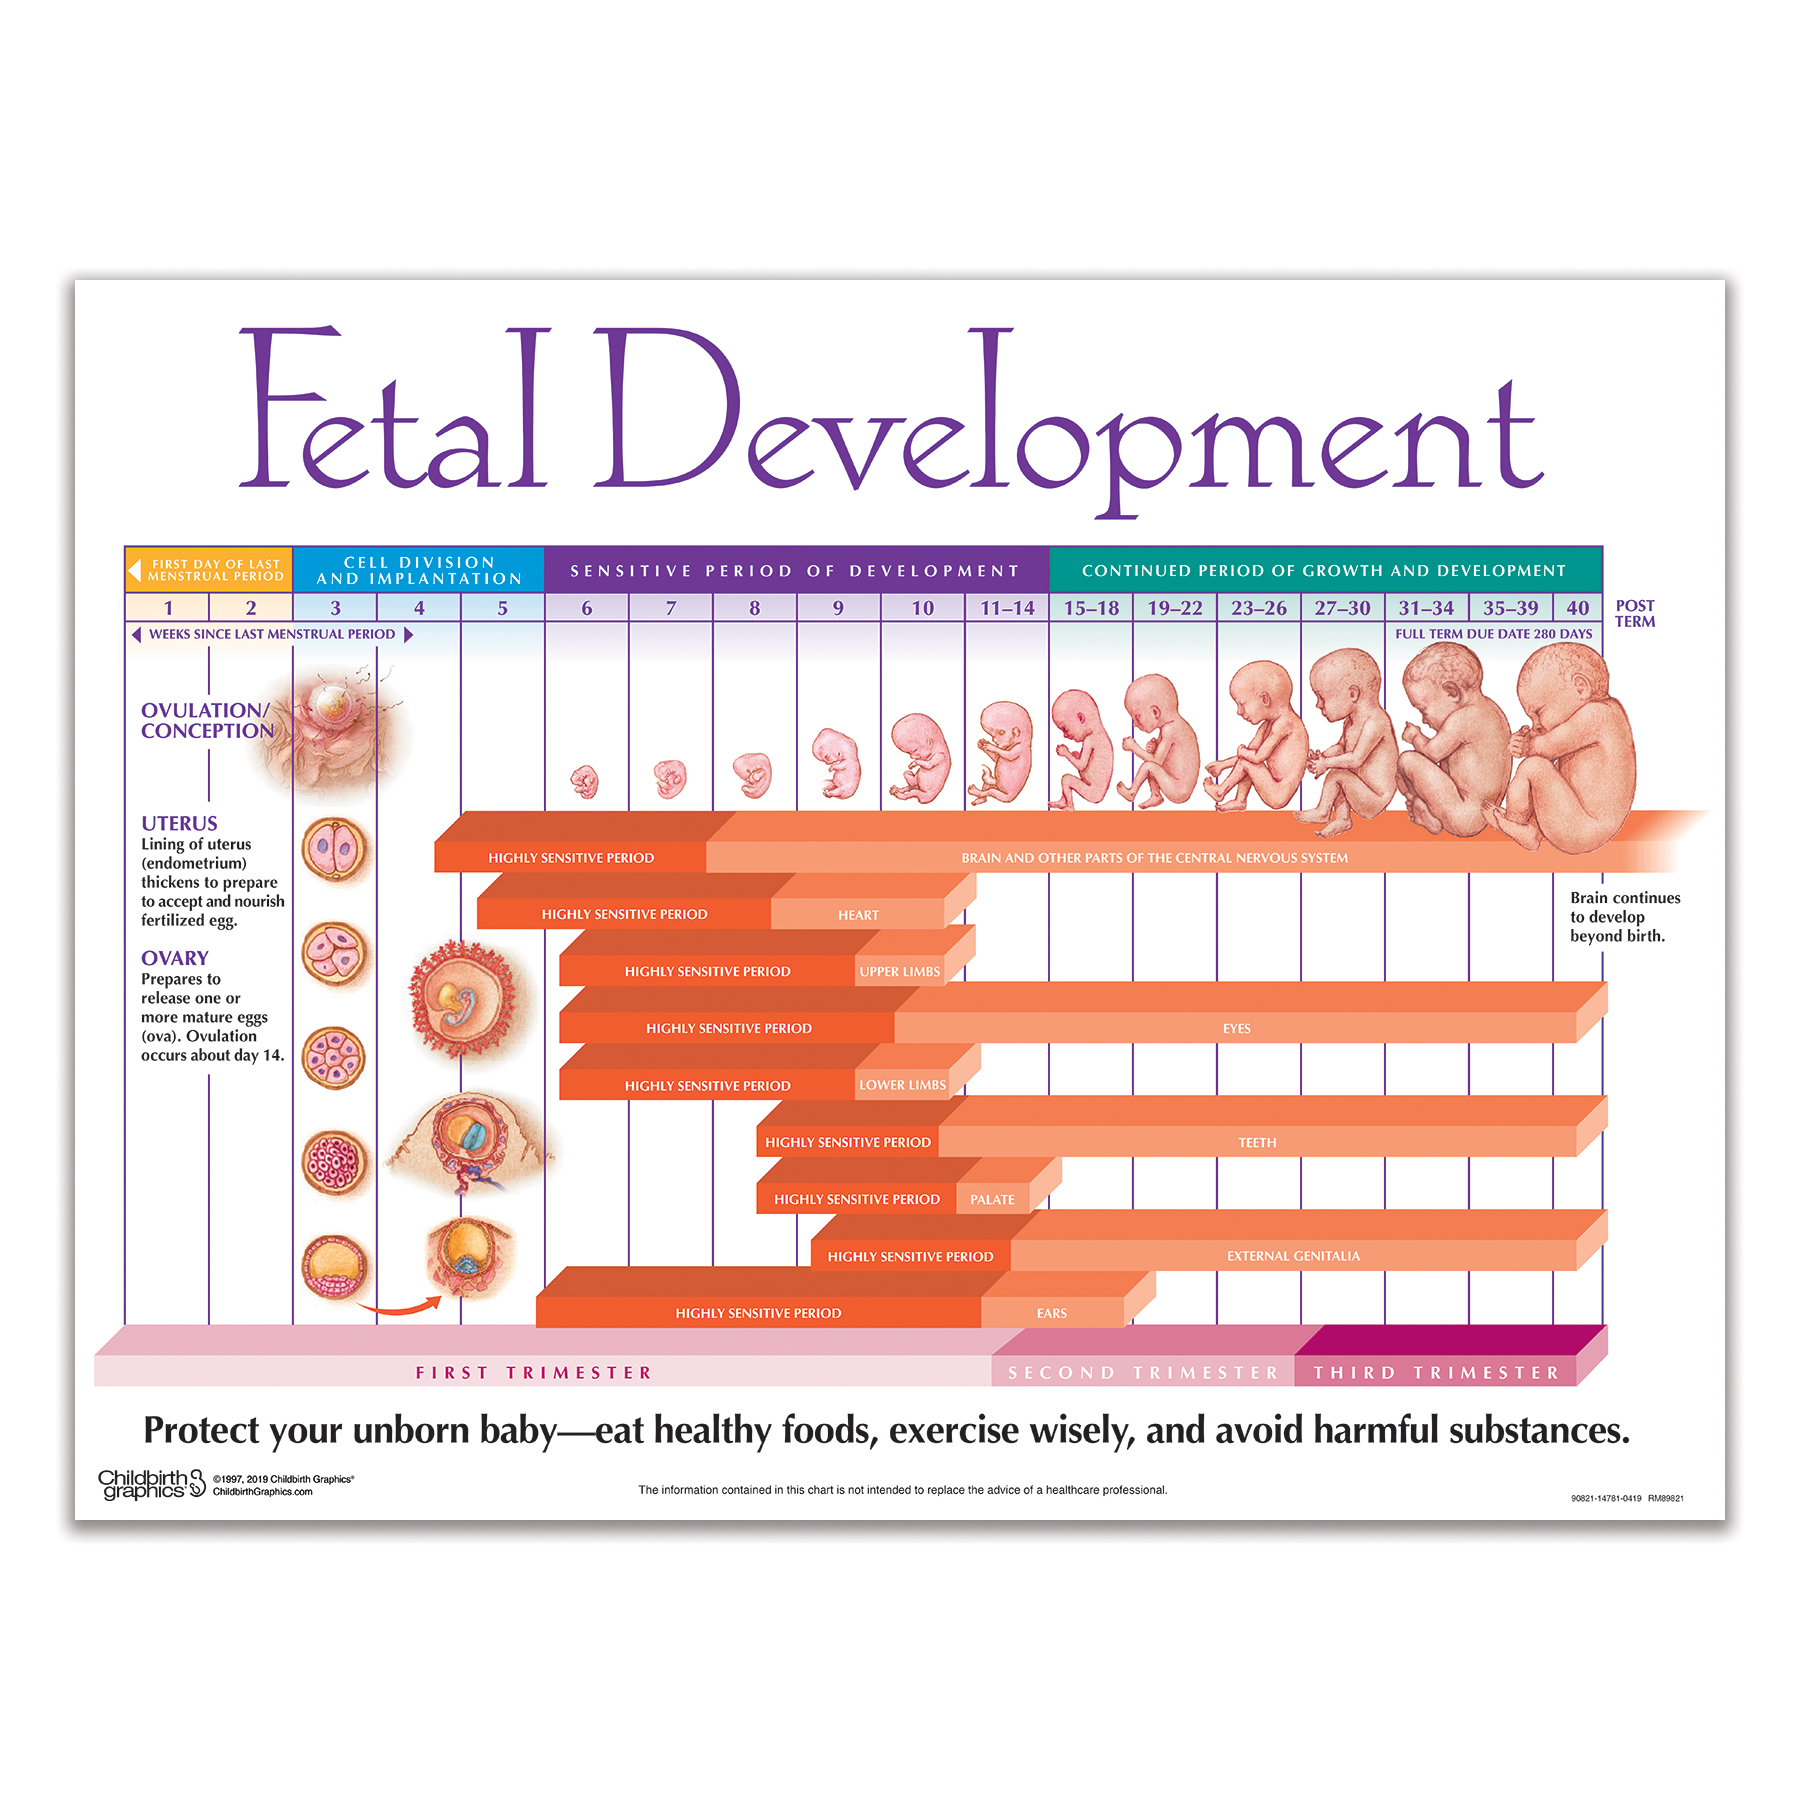 Baby Womb Development Chart: A Guide to Your Baby’s Growth Inside the Womb